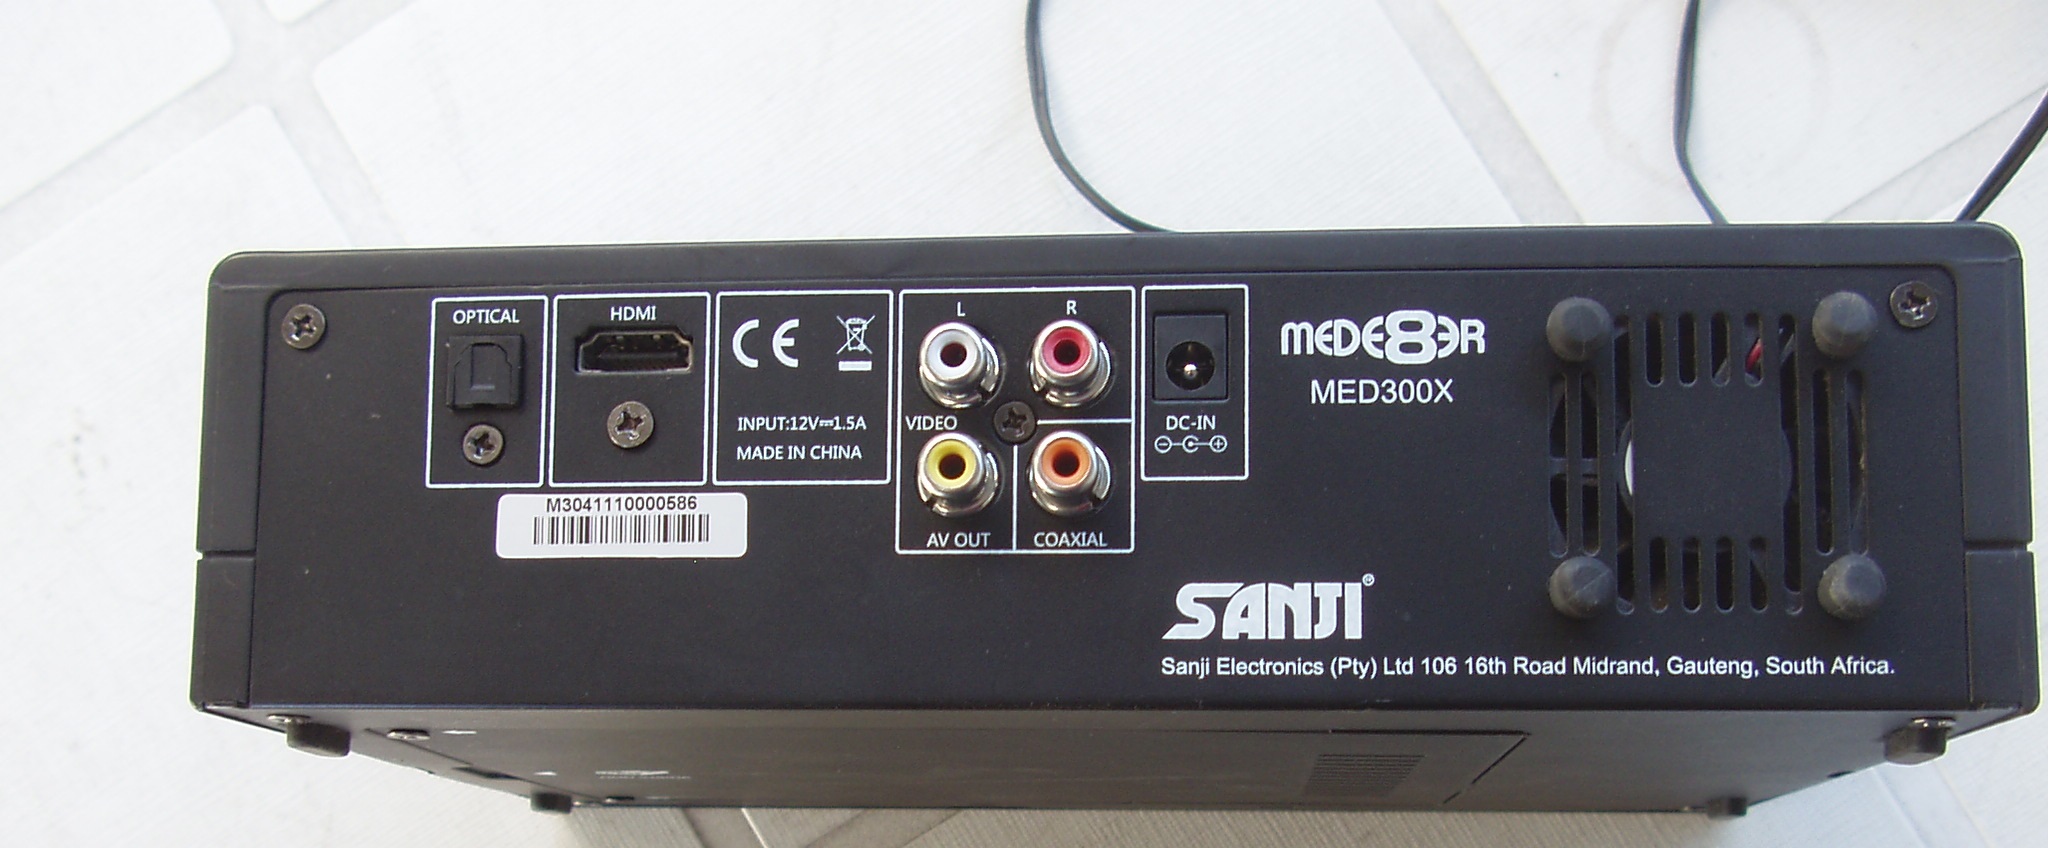 Mede8er MED300X multimedia player - with power cord  